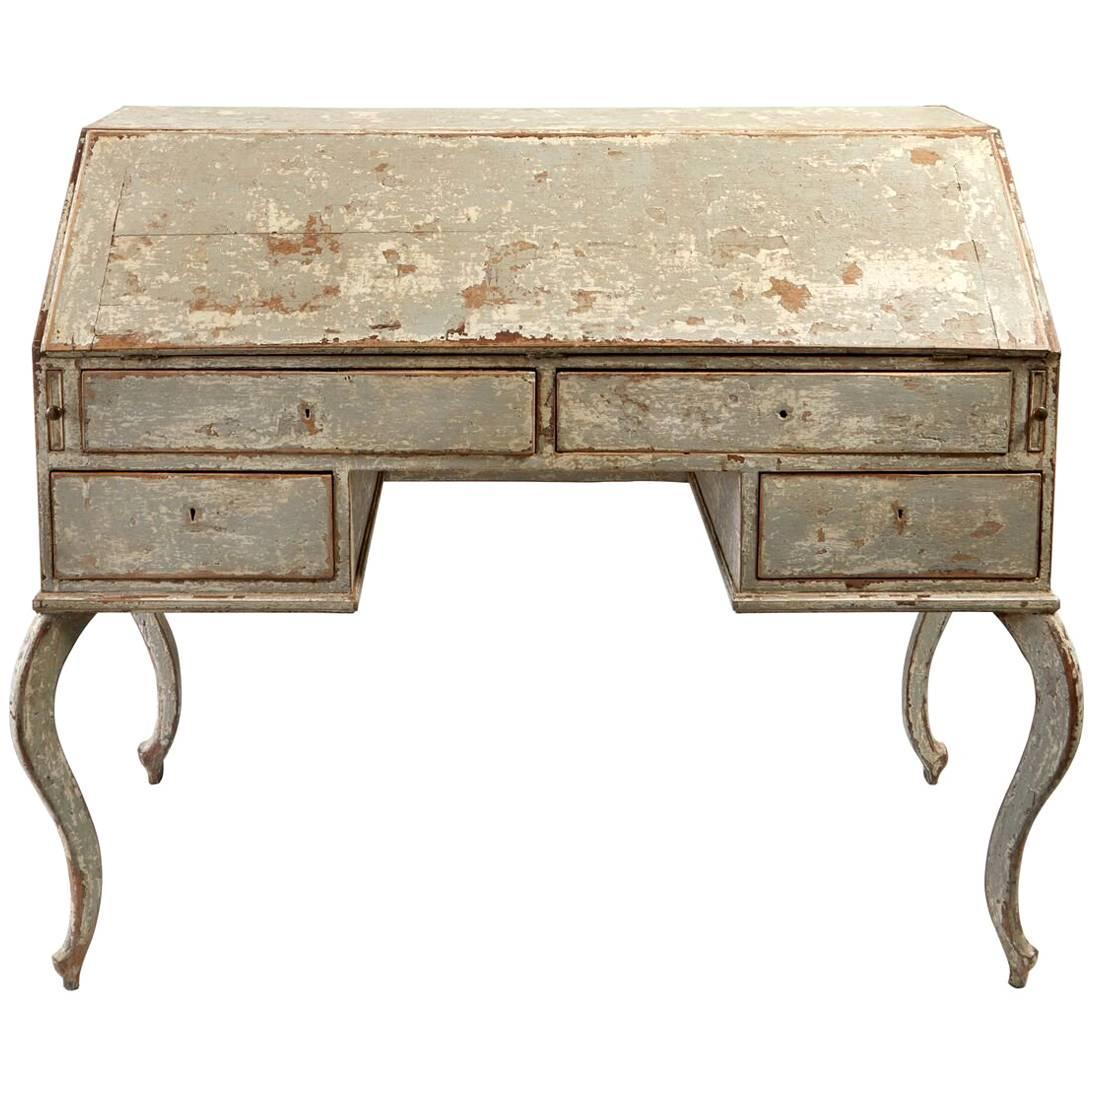 Early 19th Century French Secretary in Original Paint